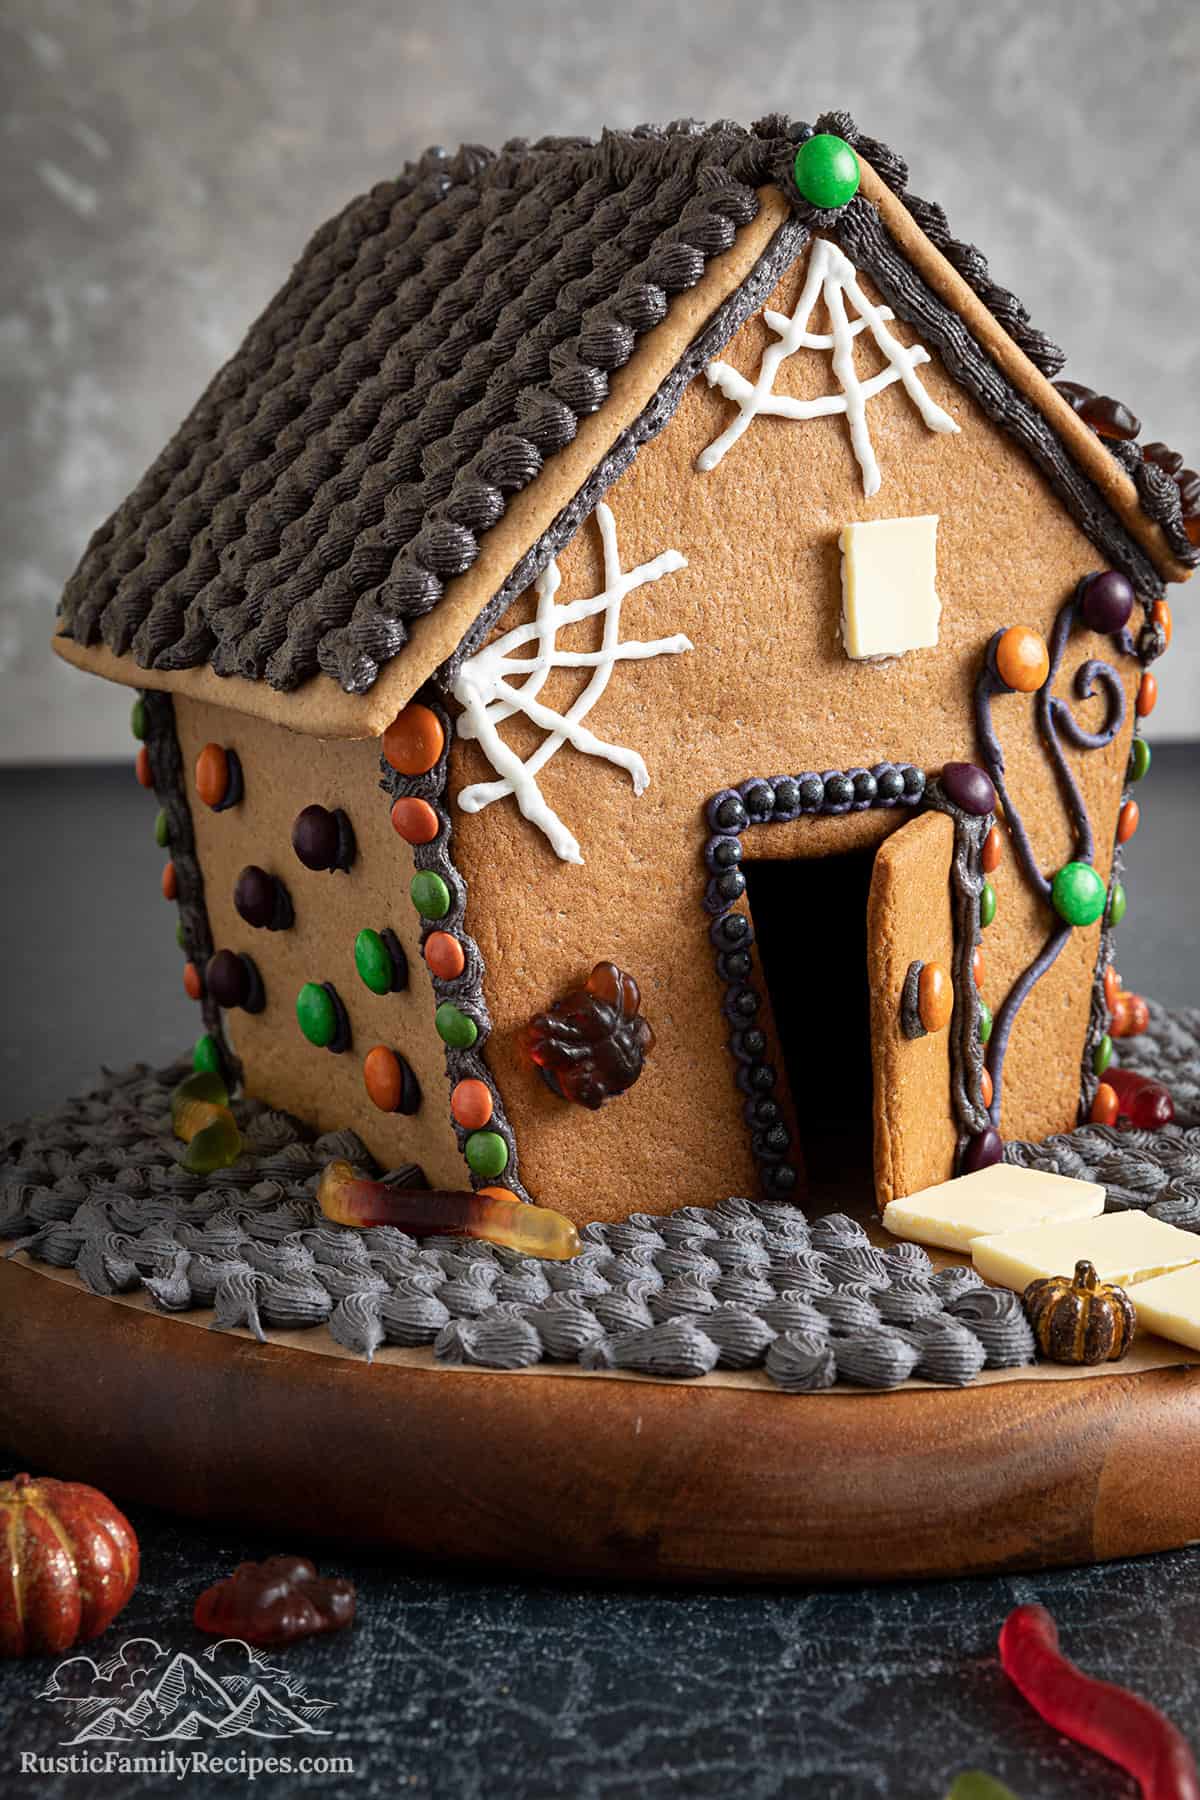 Decorated Halloween gingerbread house with an open door.